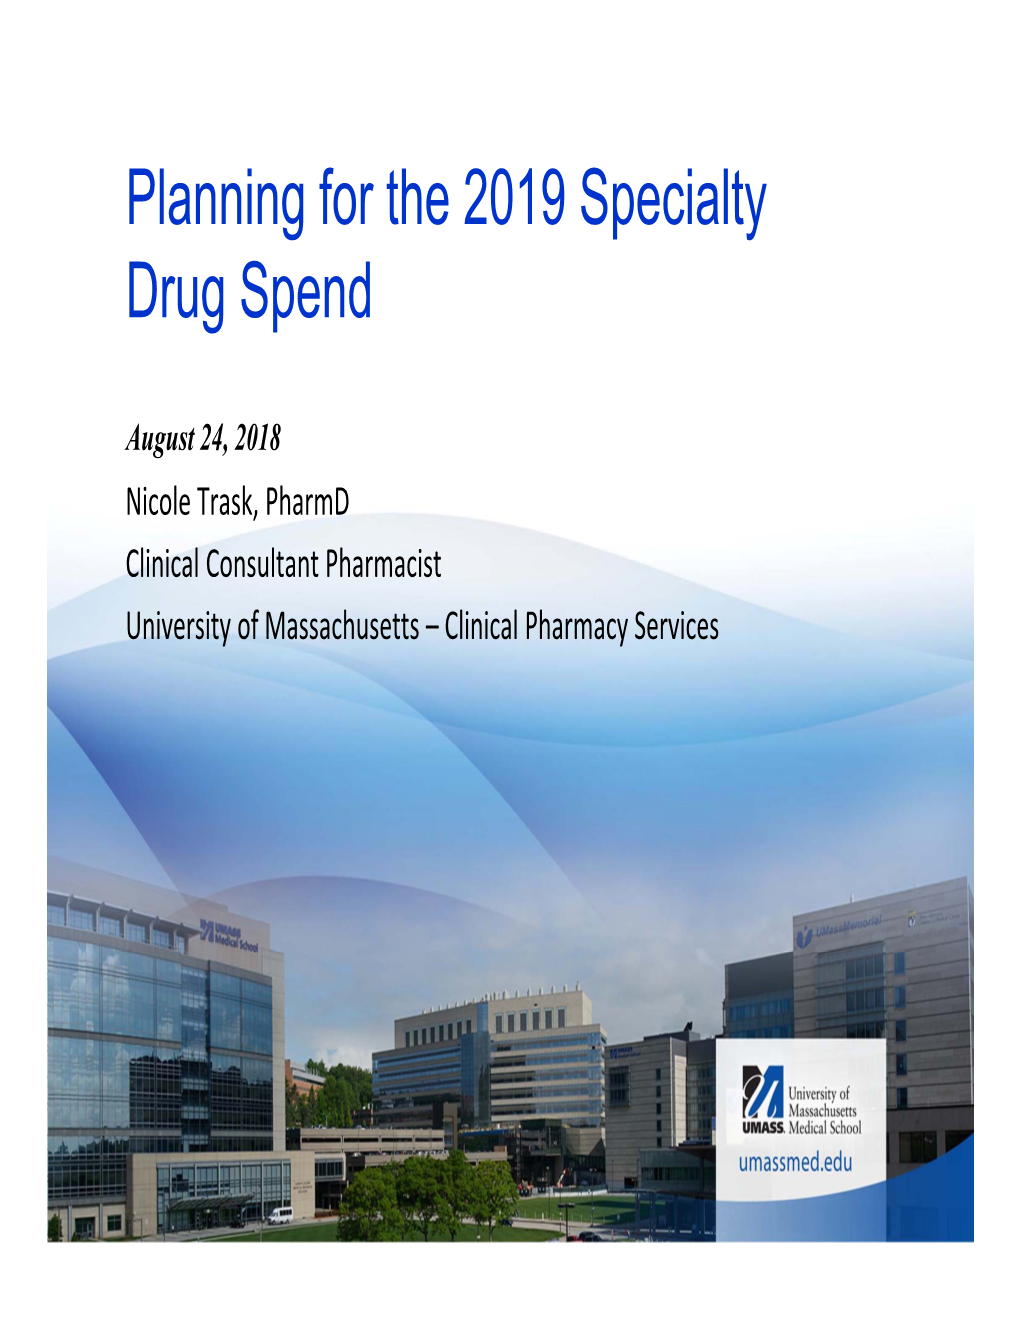 Nicole Trask, Pharmd, Planning for the 2019 Specialty Drug Spend